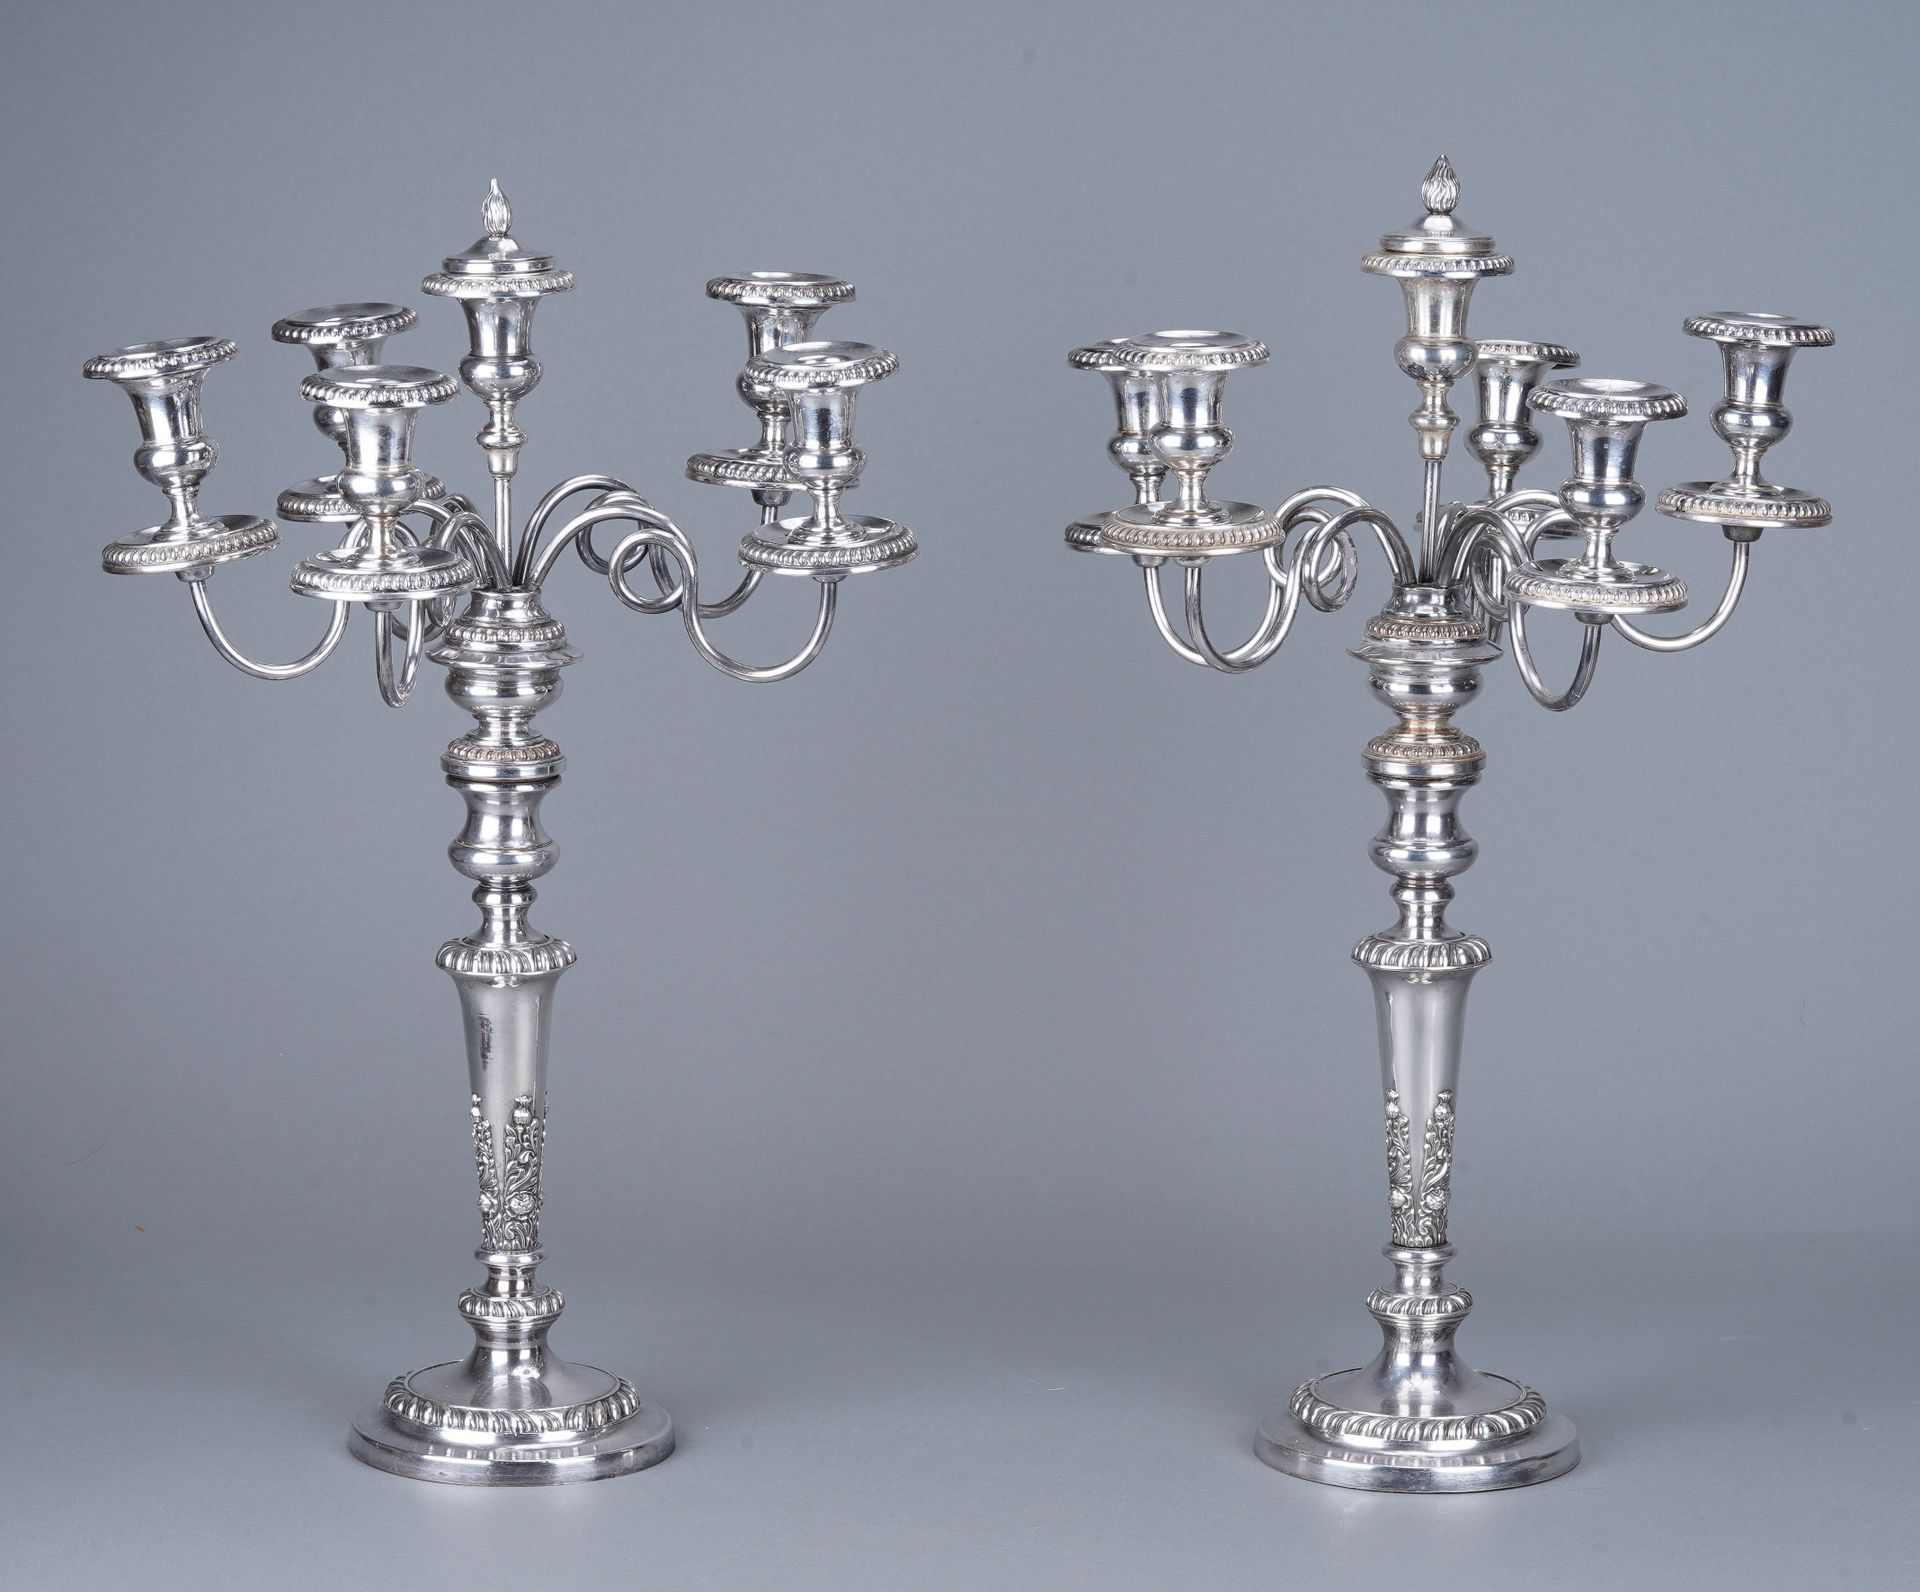 C. BALAINE Paris Pair of large 5-light candelabras (plus one in the central shaf&hellip;